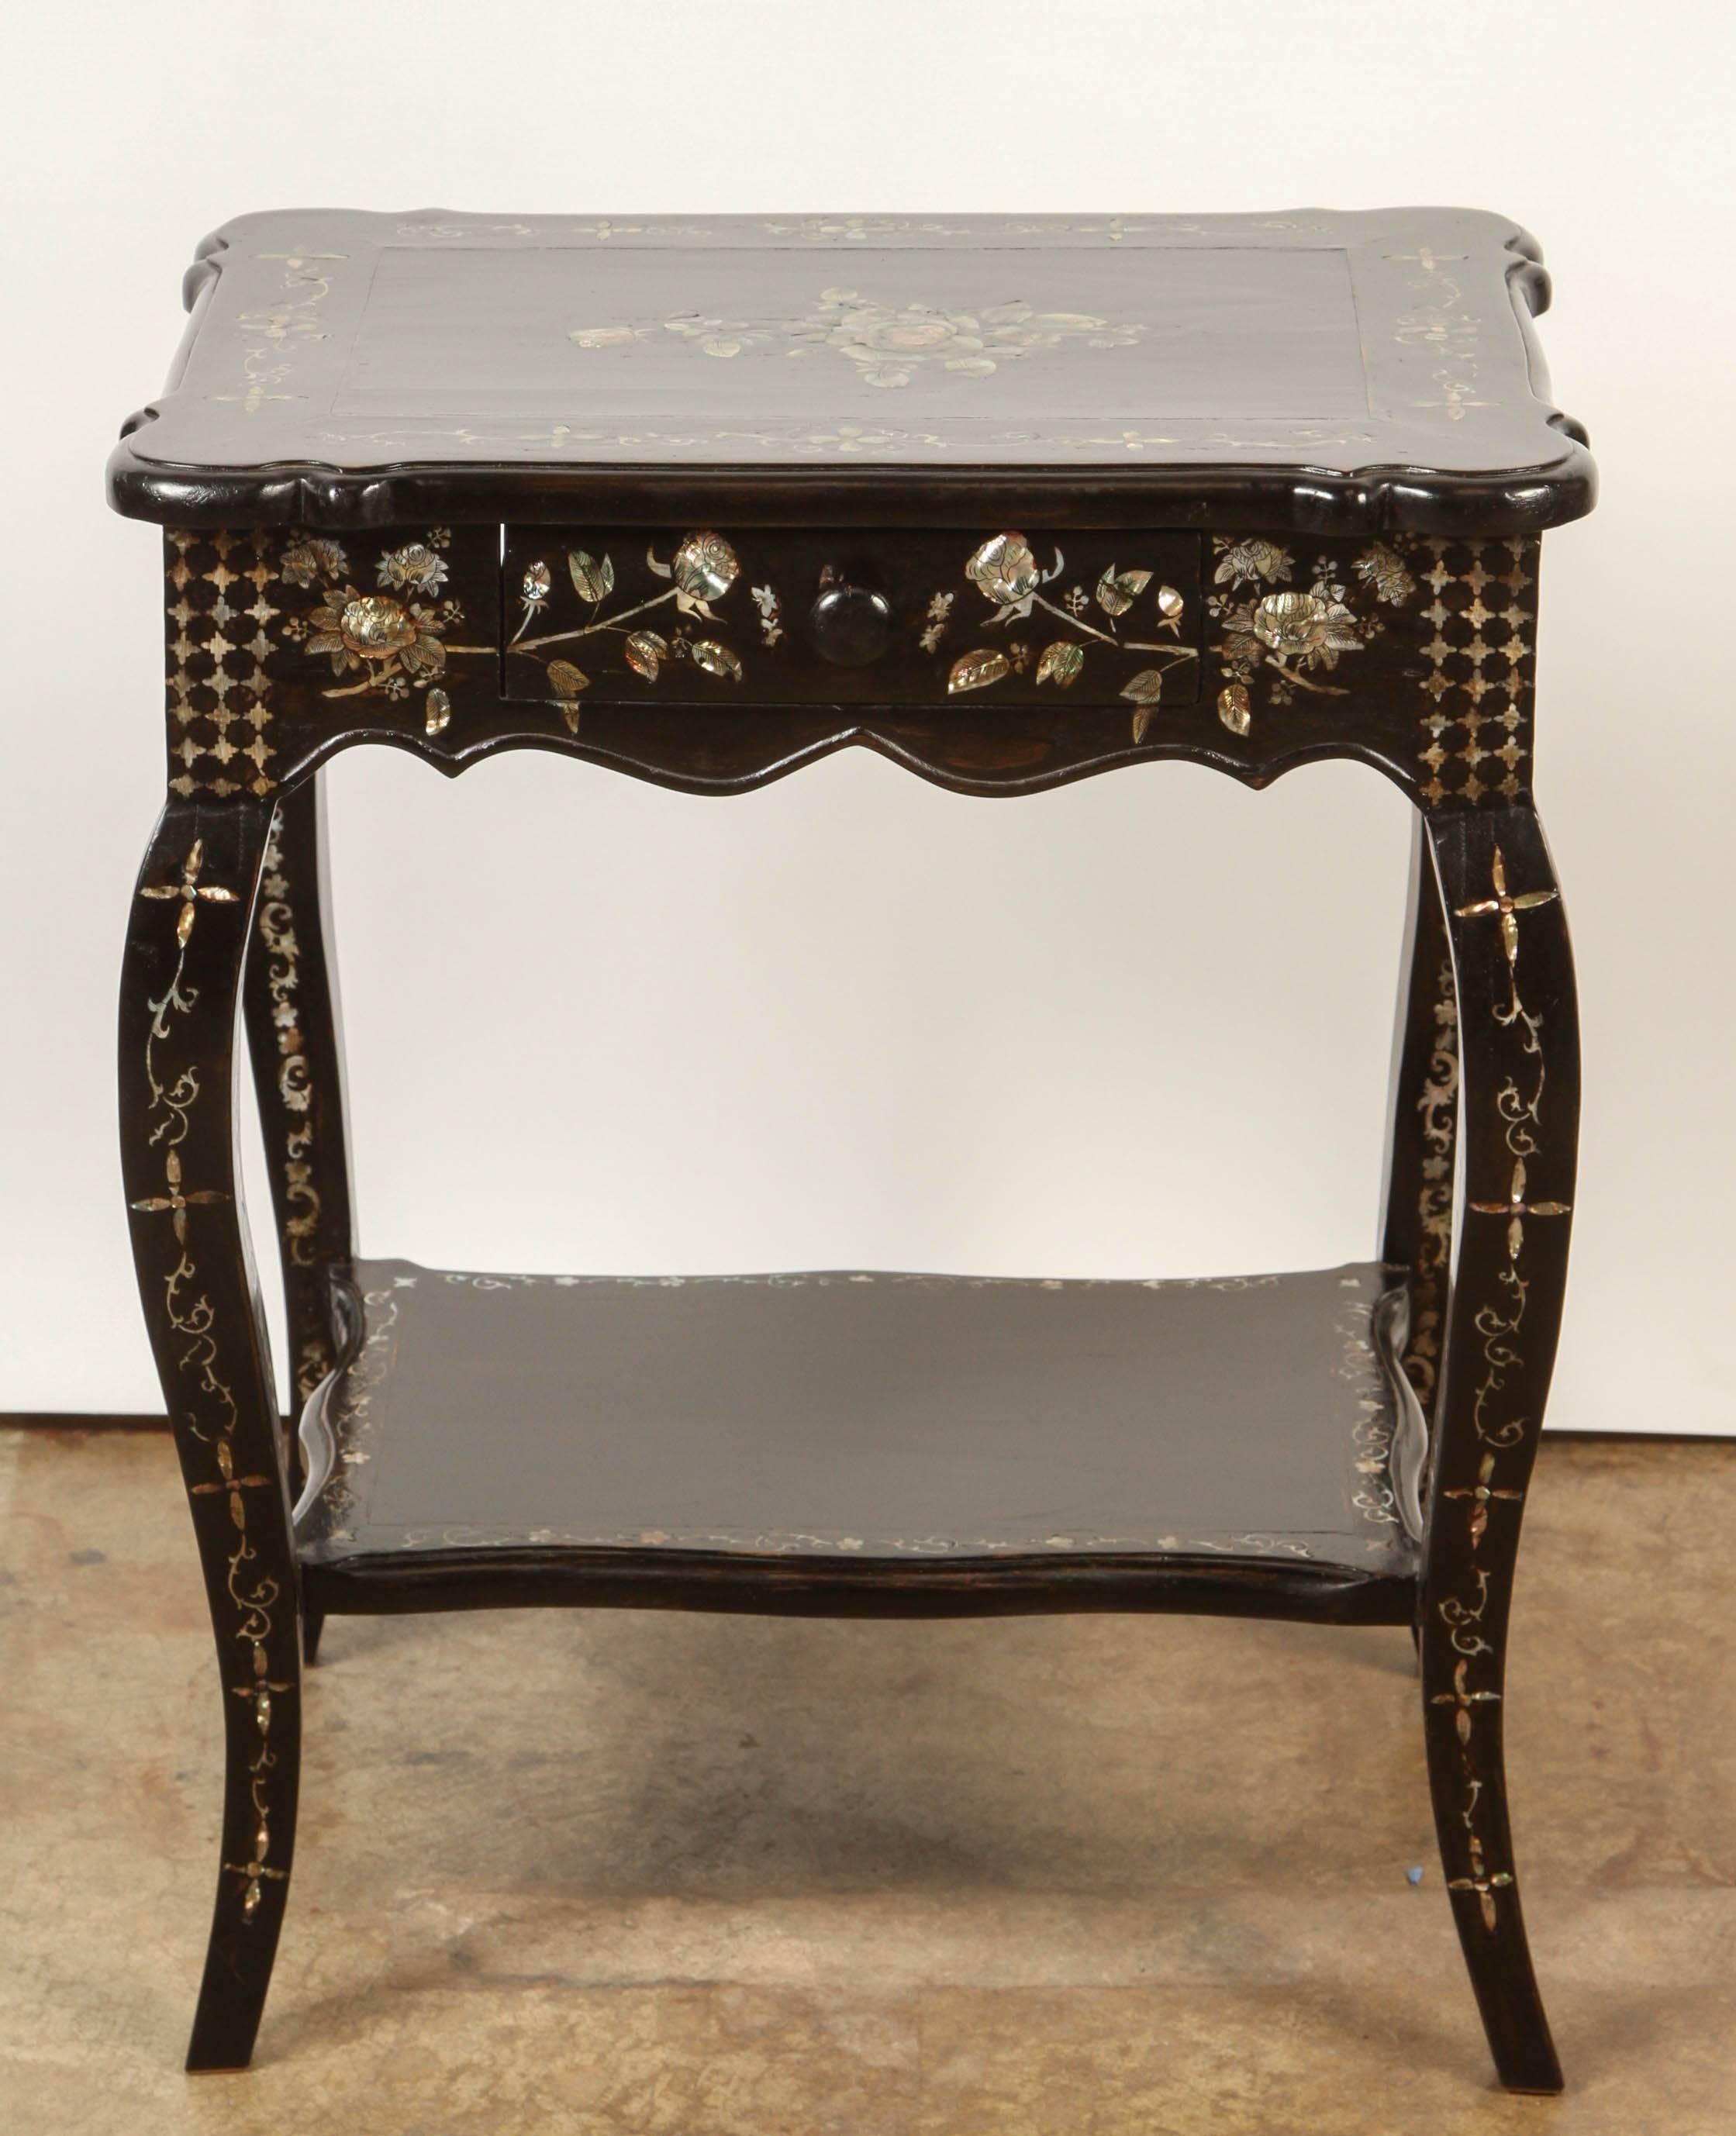 A pair of French Colonial rosewood and mother of pearl side tables, each with four legs that support a single drawer. They are richly inlaid overall with mother of pearl.  These French Colonial side tables were made in Vietnam for the local French